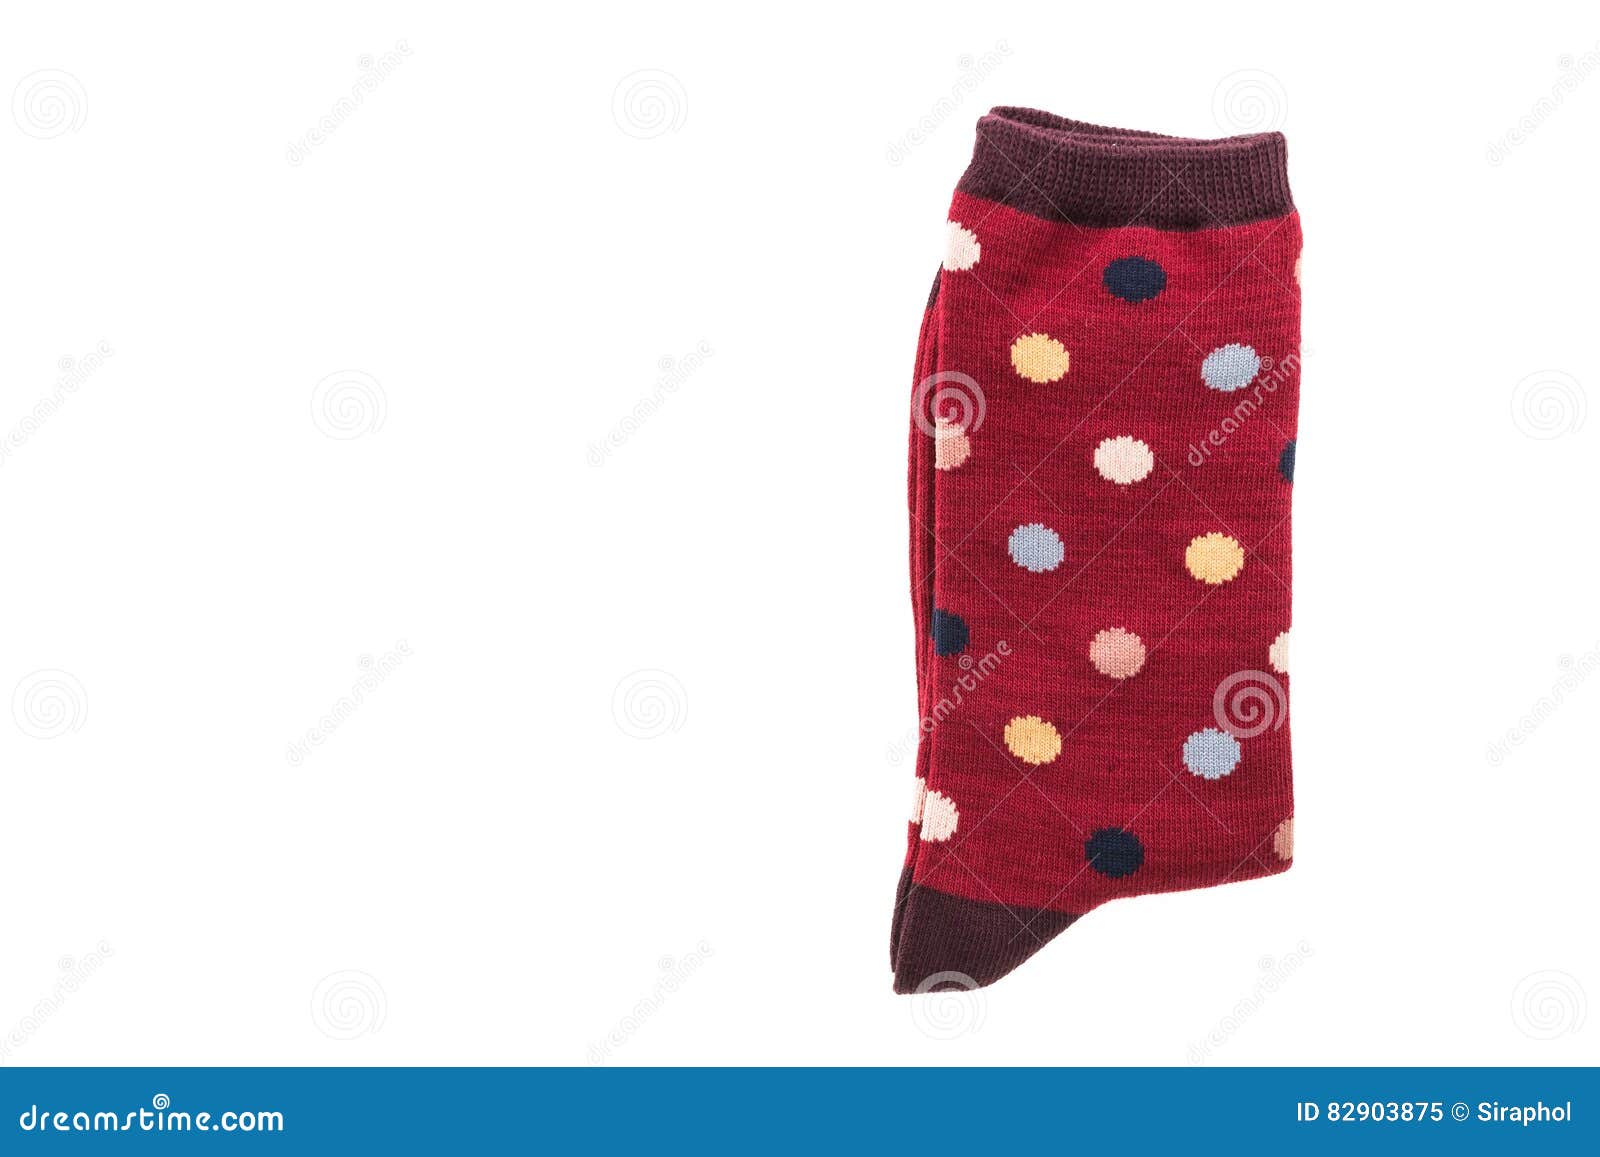 Pair of Cotton Sock for Clothing Stock Image - Image of clothes ...